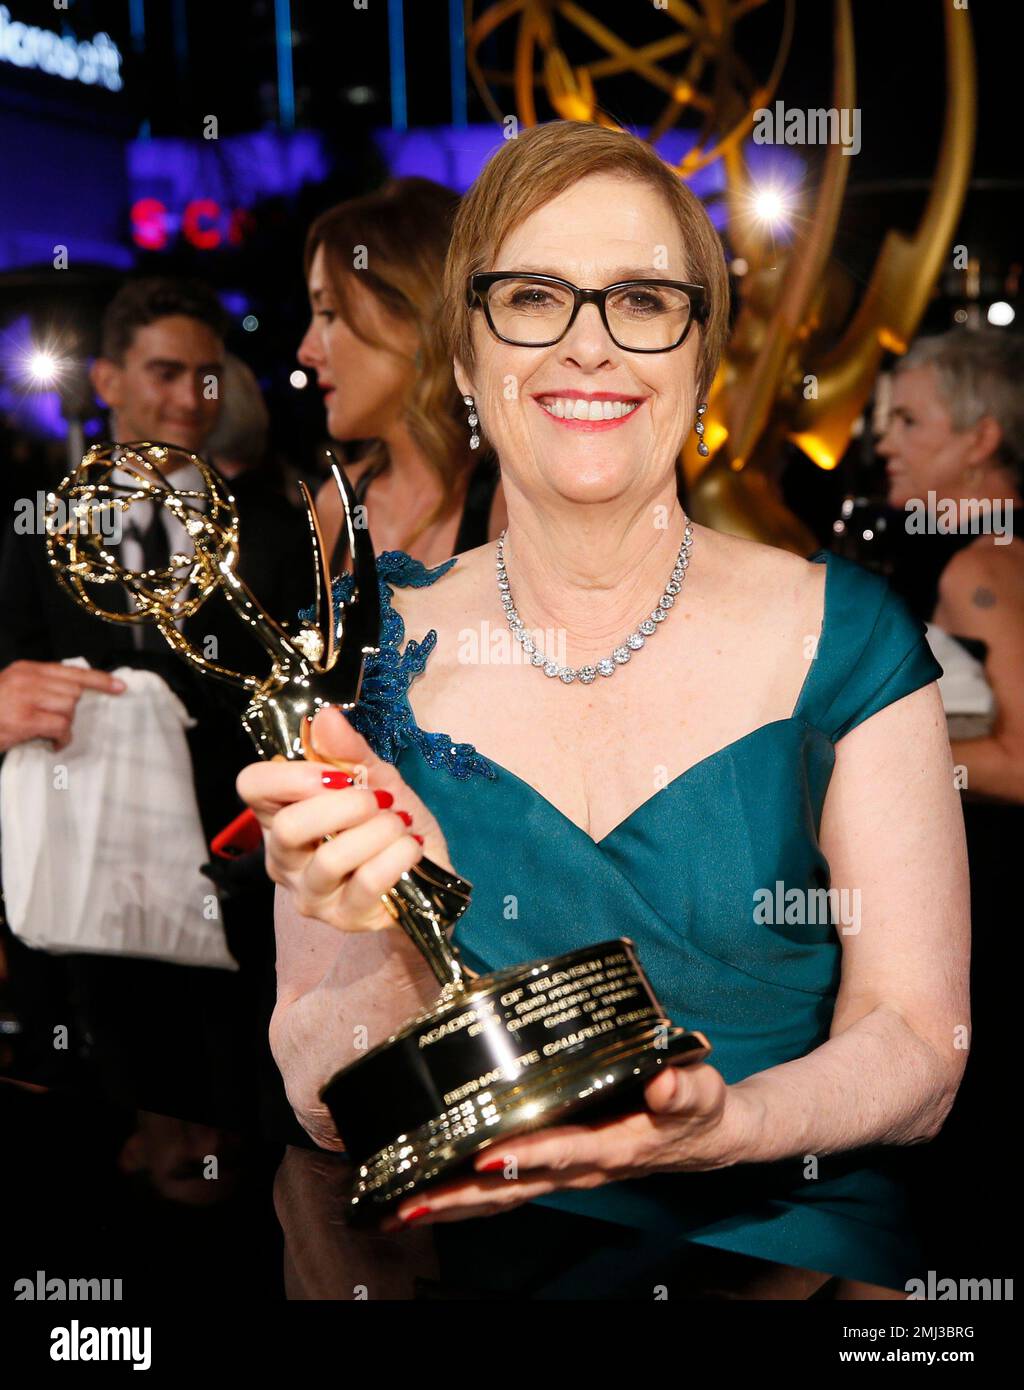 EXCLUSIVE - Bernadette Caulfield, winner of the award for outstanding drama  series for "Game of Thrones" attends the Governors Ball winners circle at  the 70th Primetime Emmy Awards on Sunday, Sept. 22,